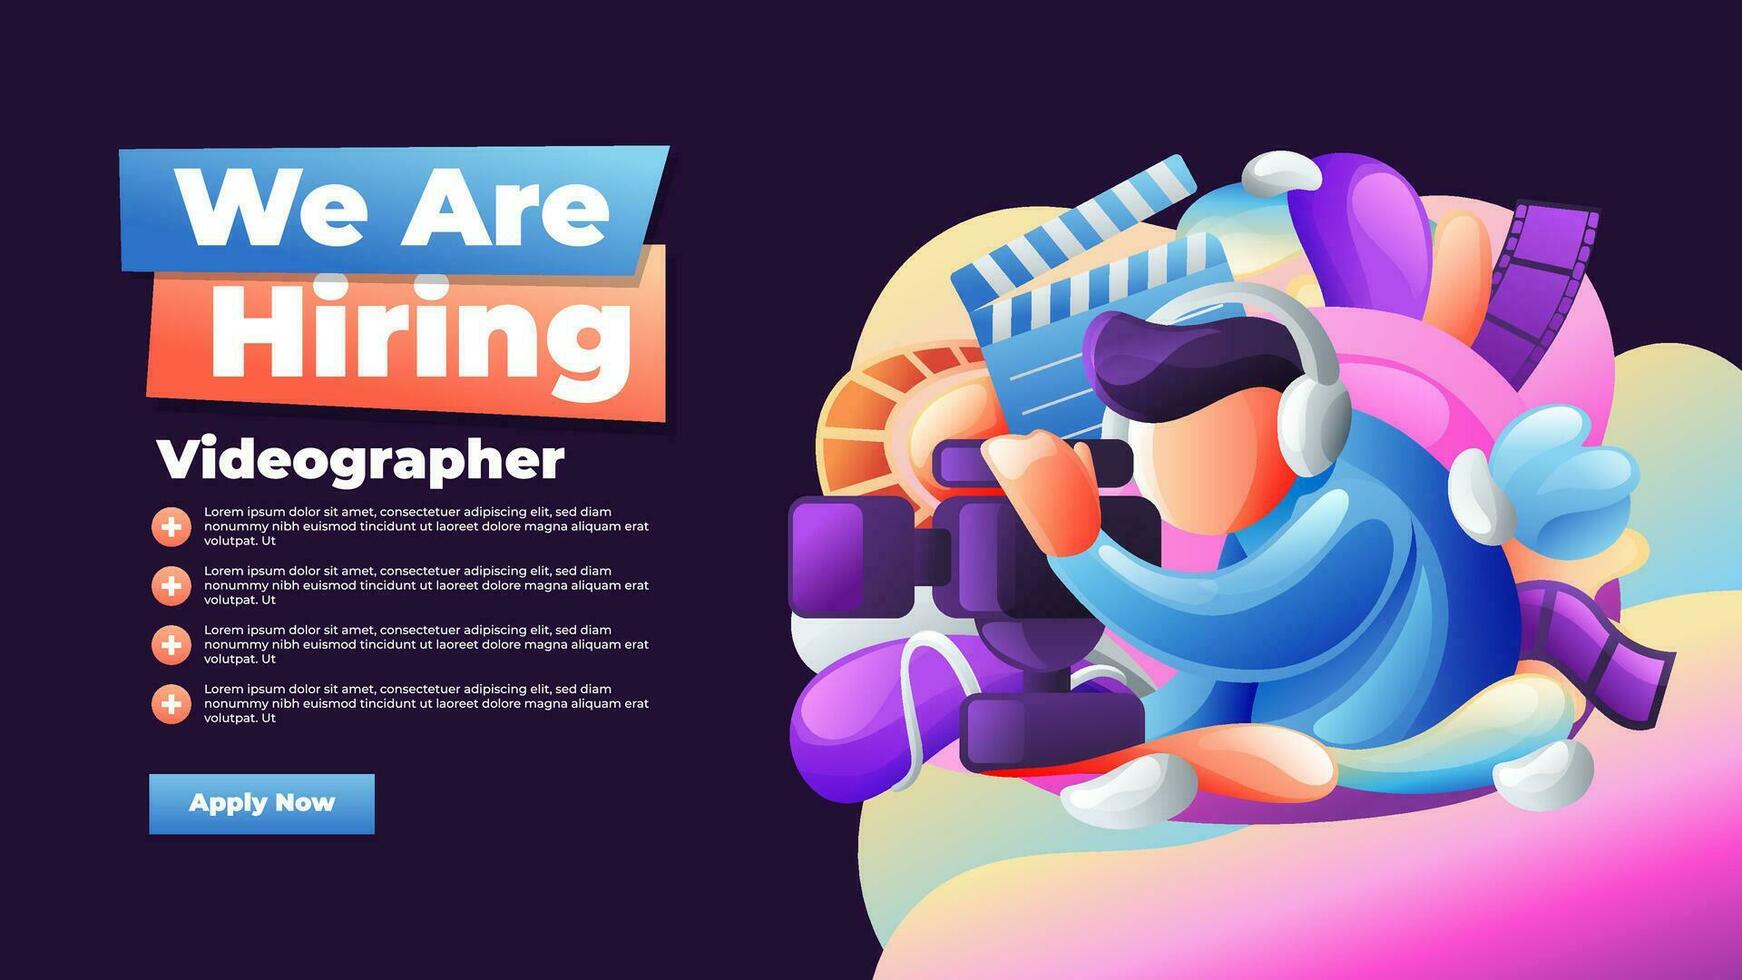 We Are Hiring Videographer Job Vacancy Banner Ads With Colorful Illustration Concept vector